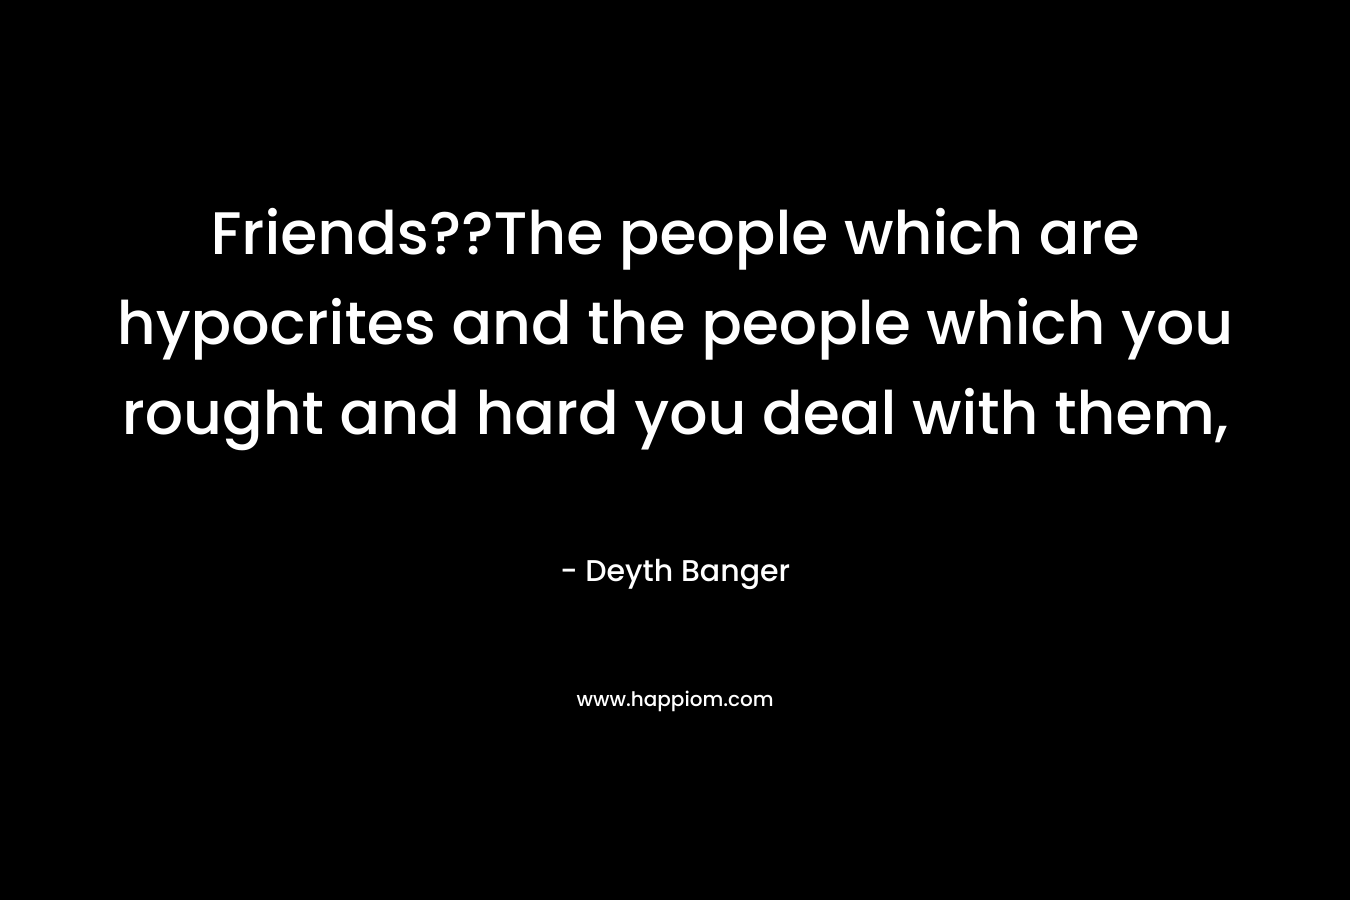 Friends??The people which are hypocrites and the people which you rought and hard you deal with them,